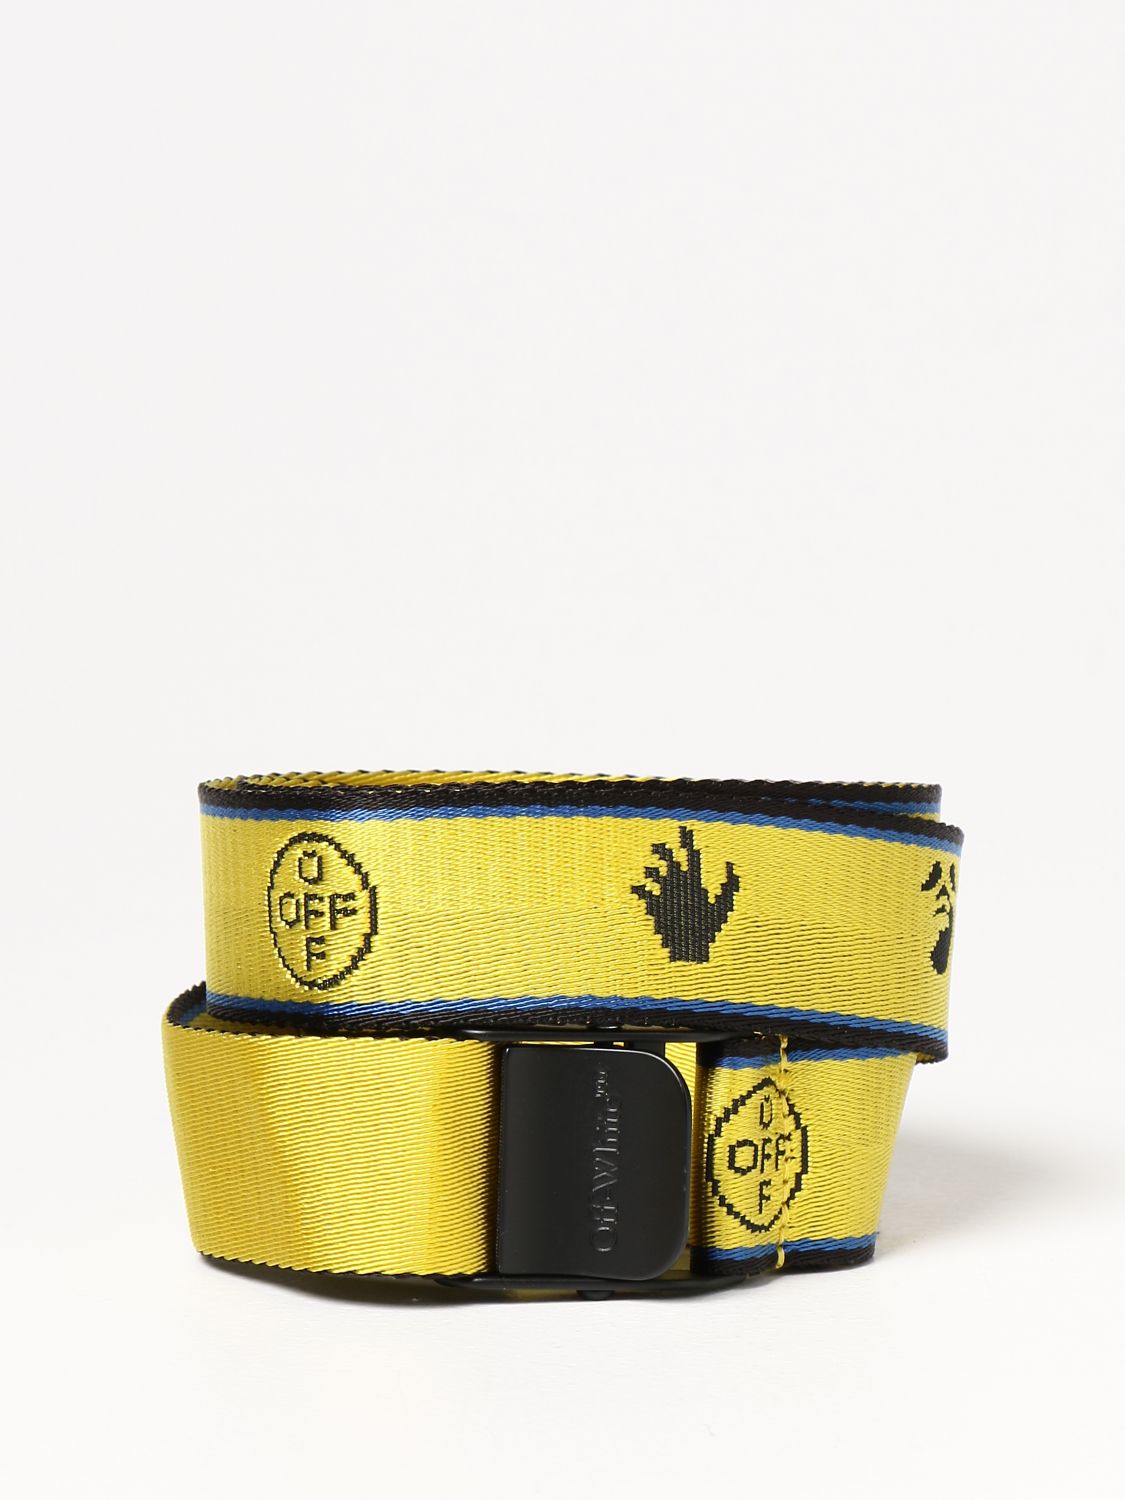 OFF WHITE: classic Industrial belt | Belt Off White Women Yellow | Belt Off White OWRB043R21FAB001